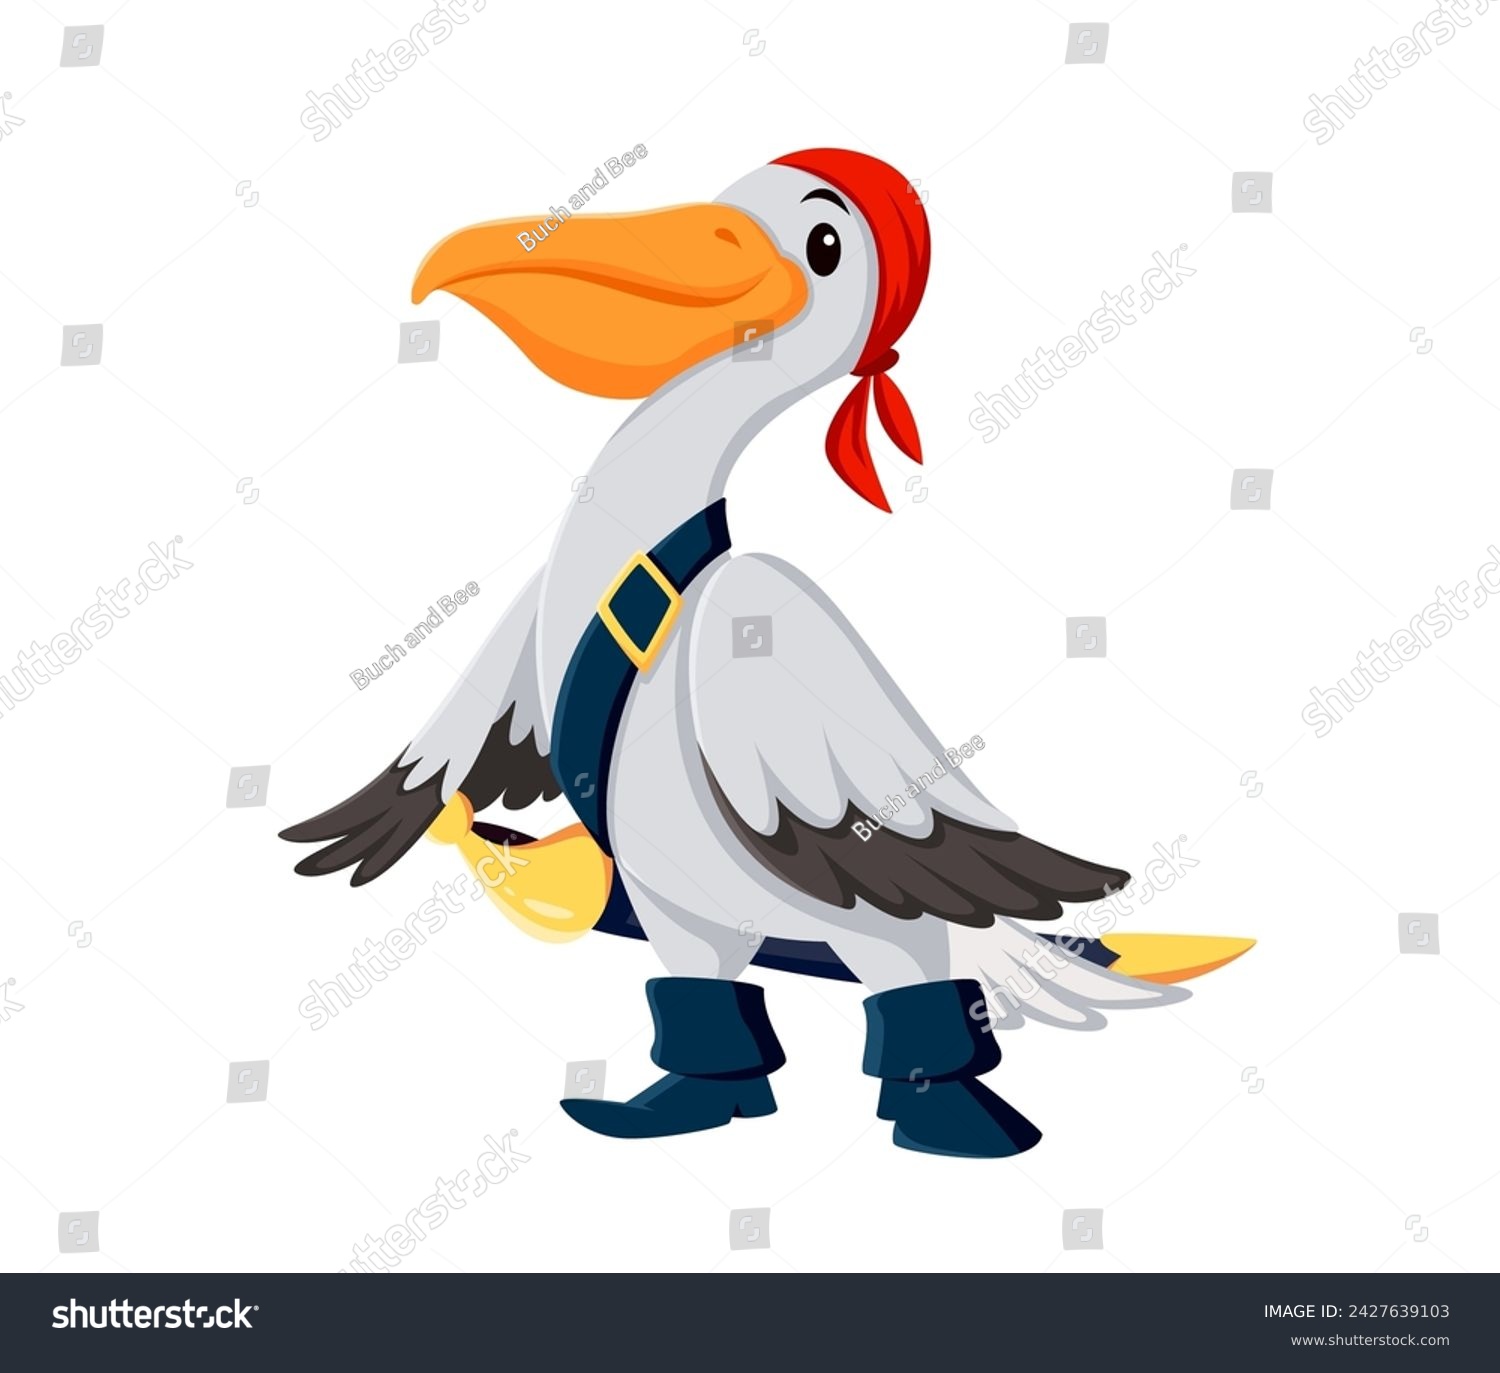 SVG of Cartoon pelican bird pirate corsair animal character. Isolated vector feathered buccaneer sailor personage donning red bandana and sword, squawks orders, searching for fishy treasures on the high seas svg